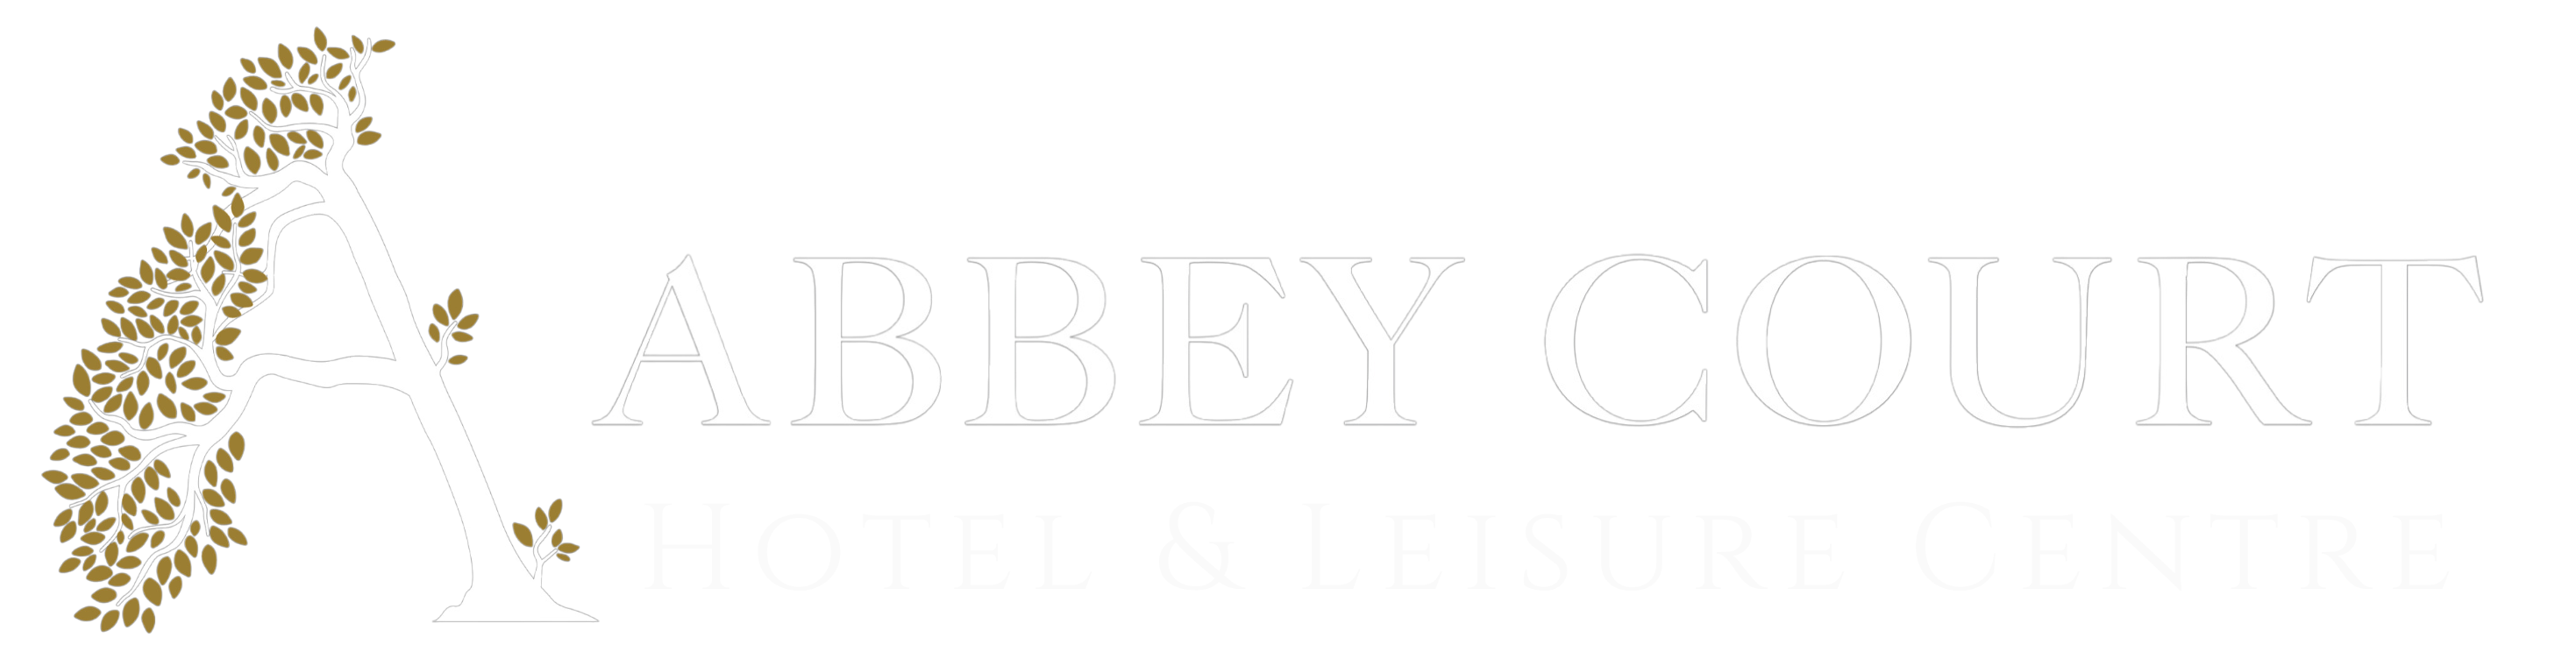 Abbey Court Hotel and Leisure Centre